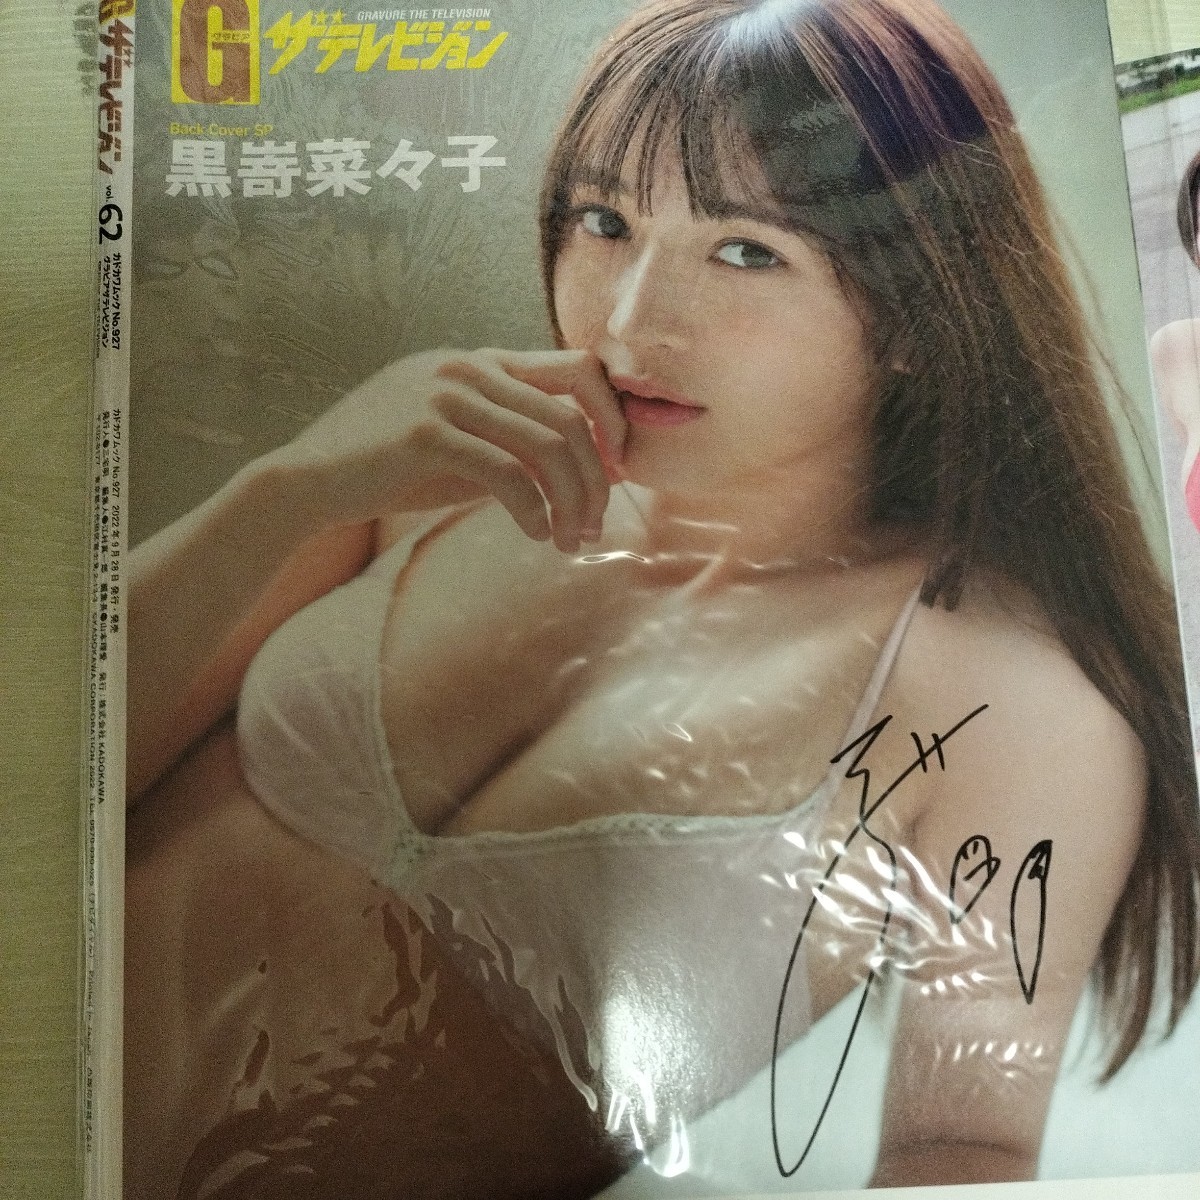  gravure The Television vol.62 new goods not yet read goods black .... with autograph 